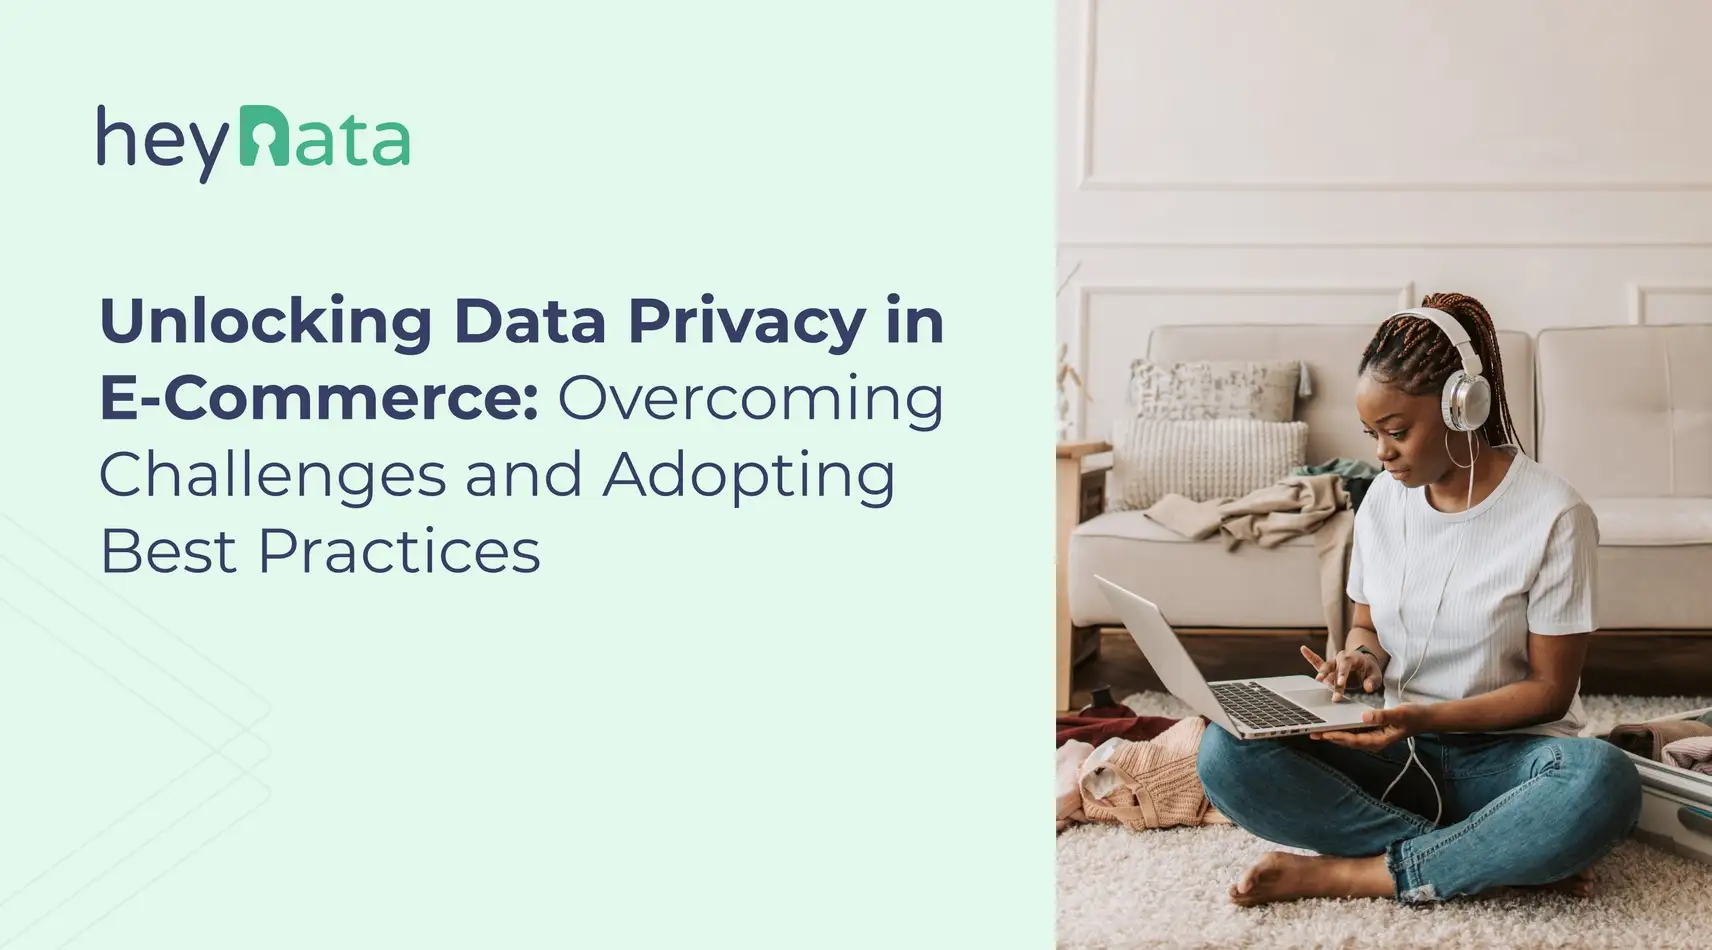 Unlocking Data Privacy in E-Commerce: Overcoming Challenges and Adopting Best Practices